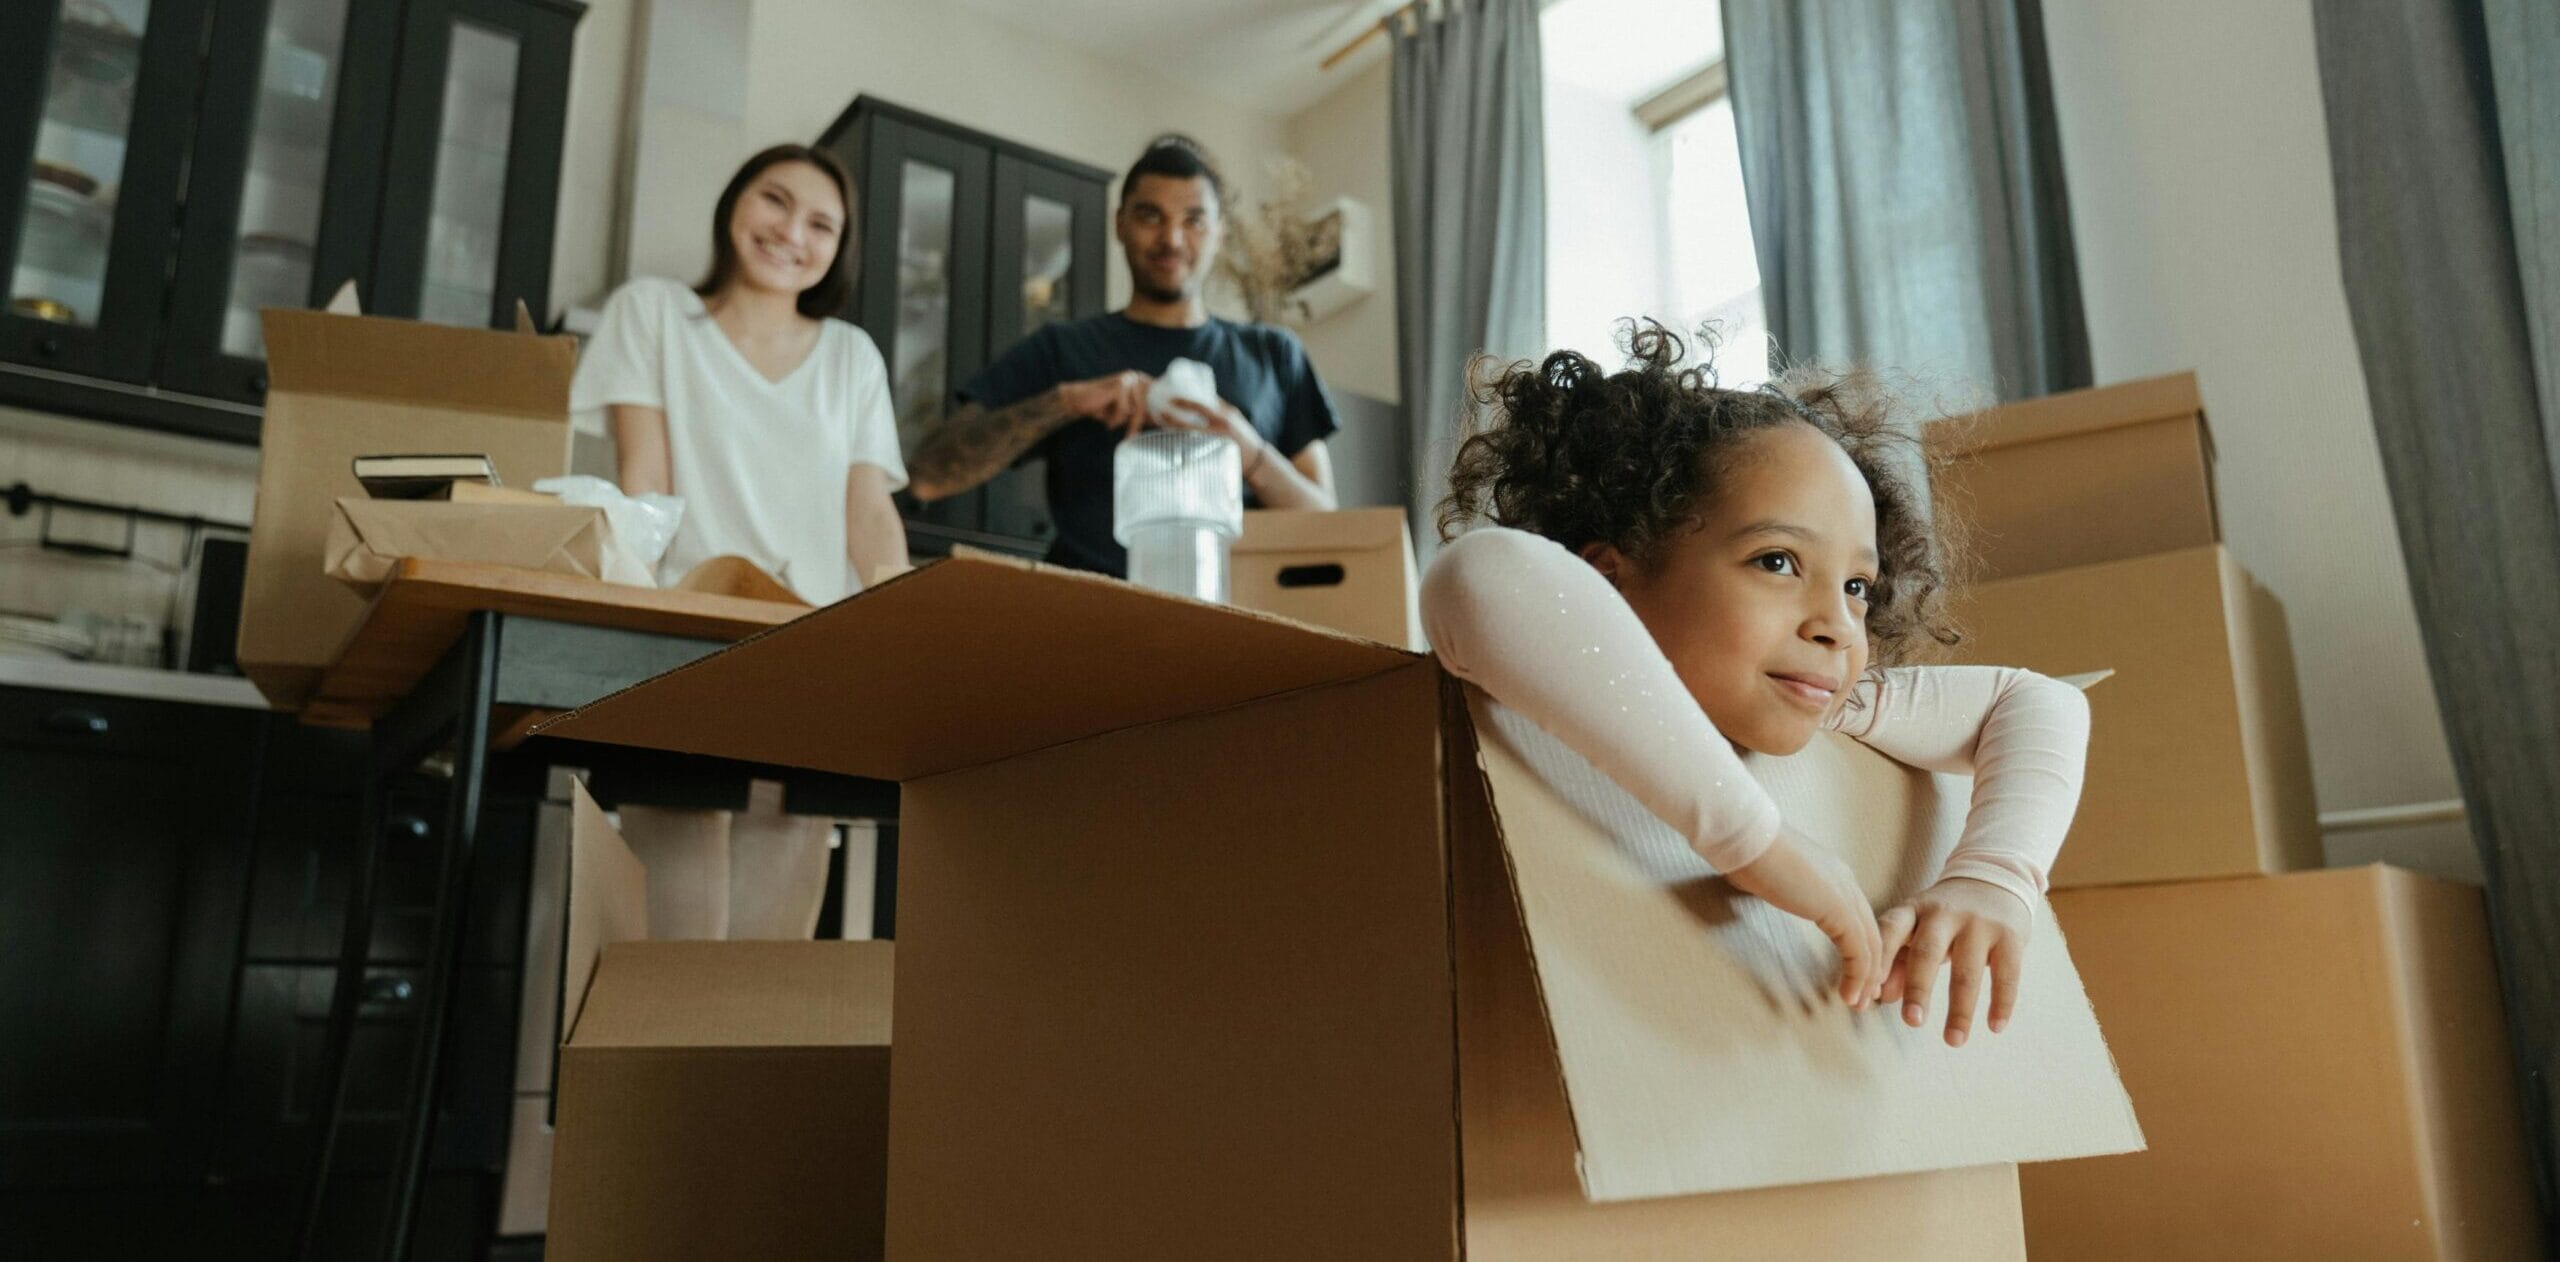 little girl sitting in moving box with man and woman looking on behind